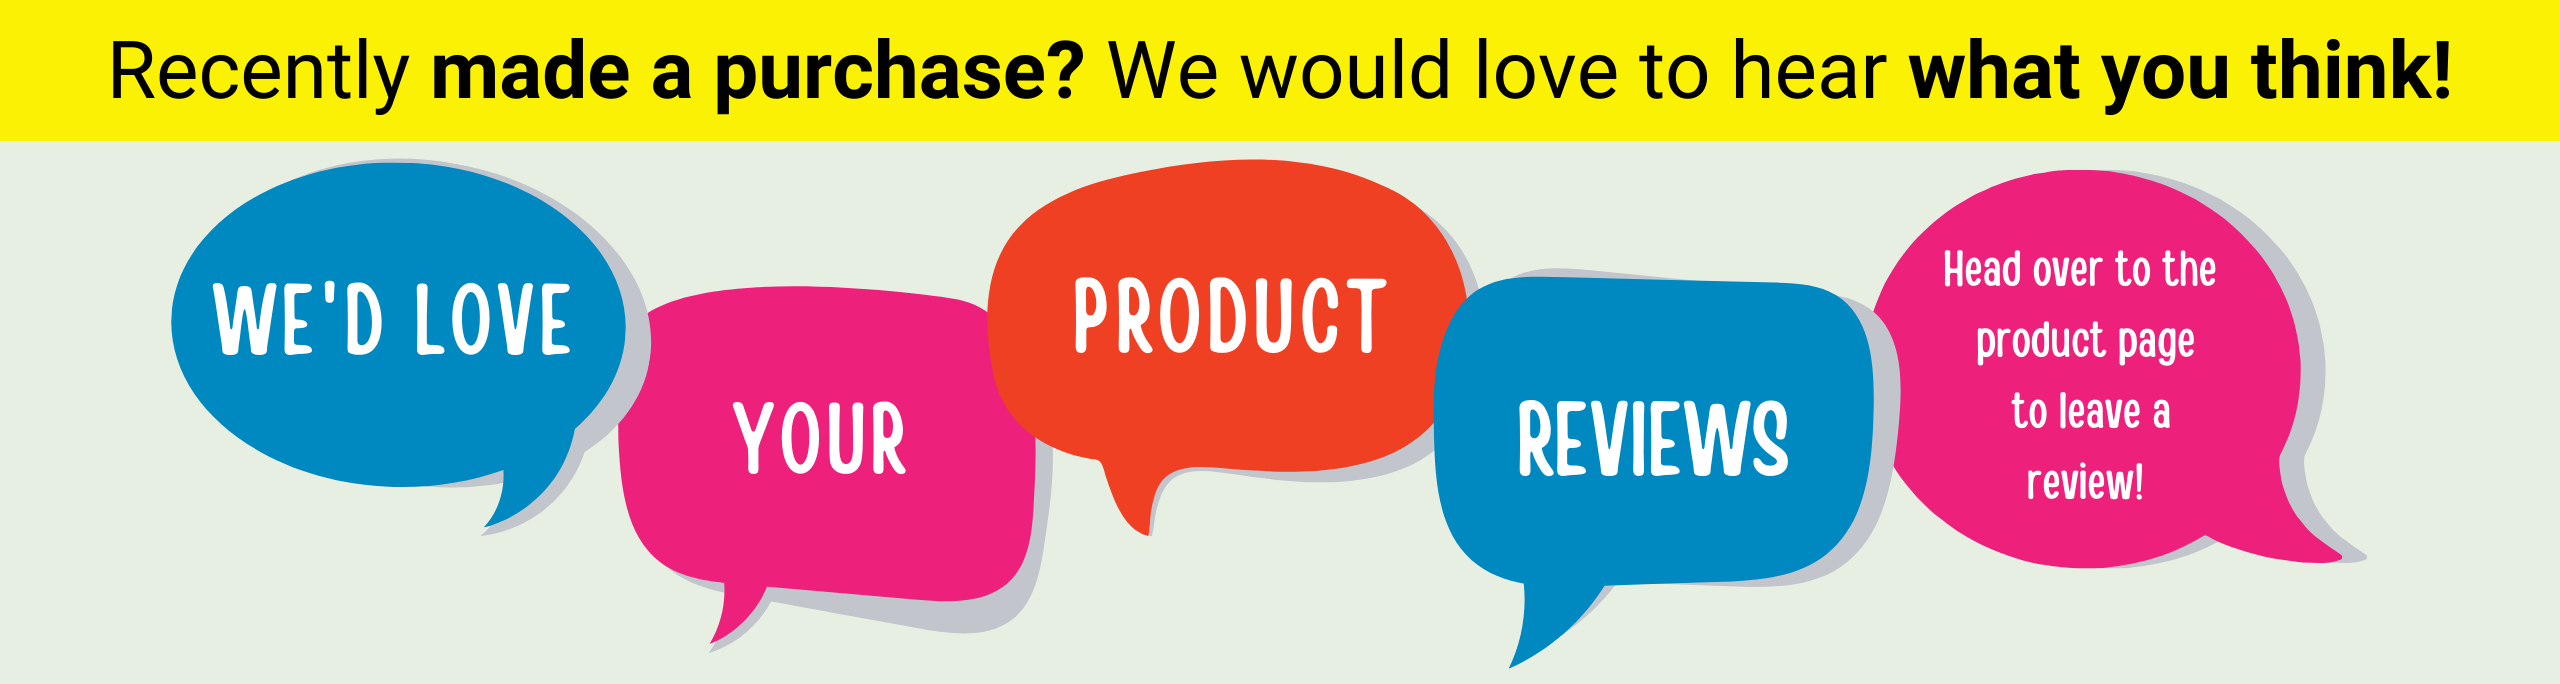 Recently made a purchase? We would love to hear what you think! We'd love your product reviews Head over to the  product page  to leave a review!